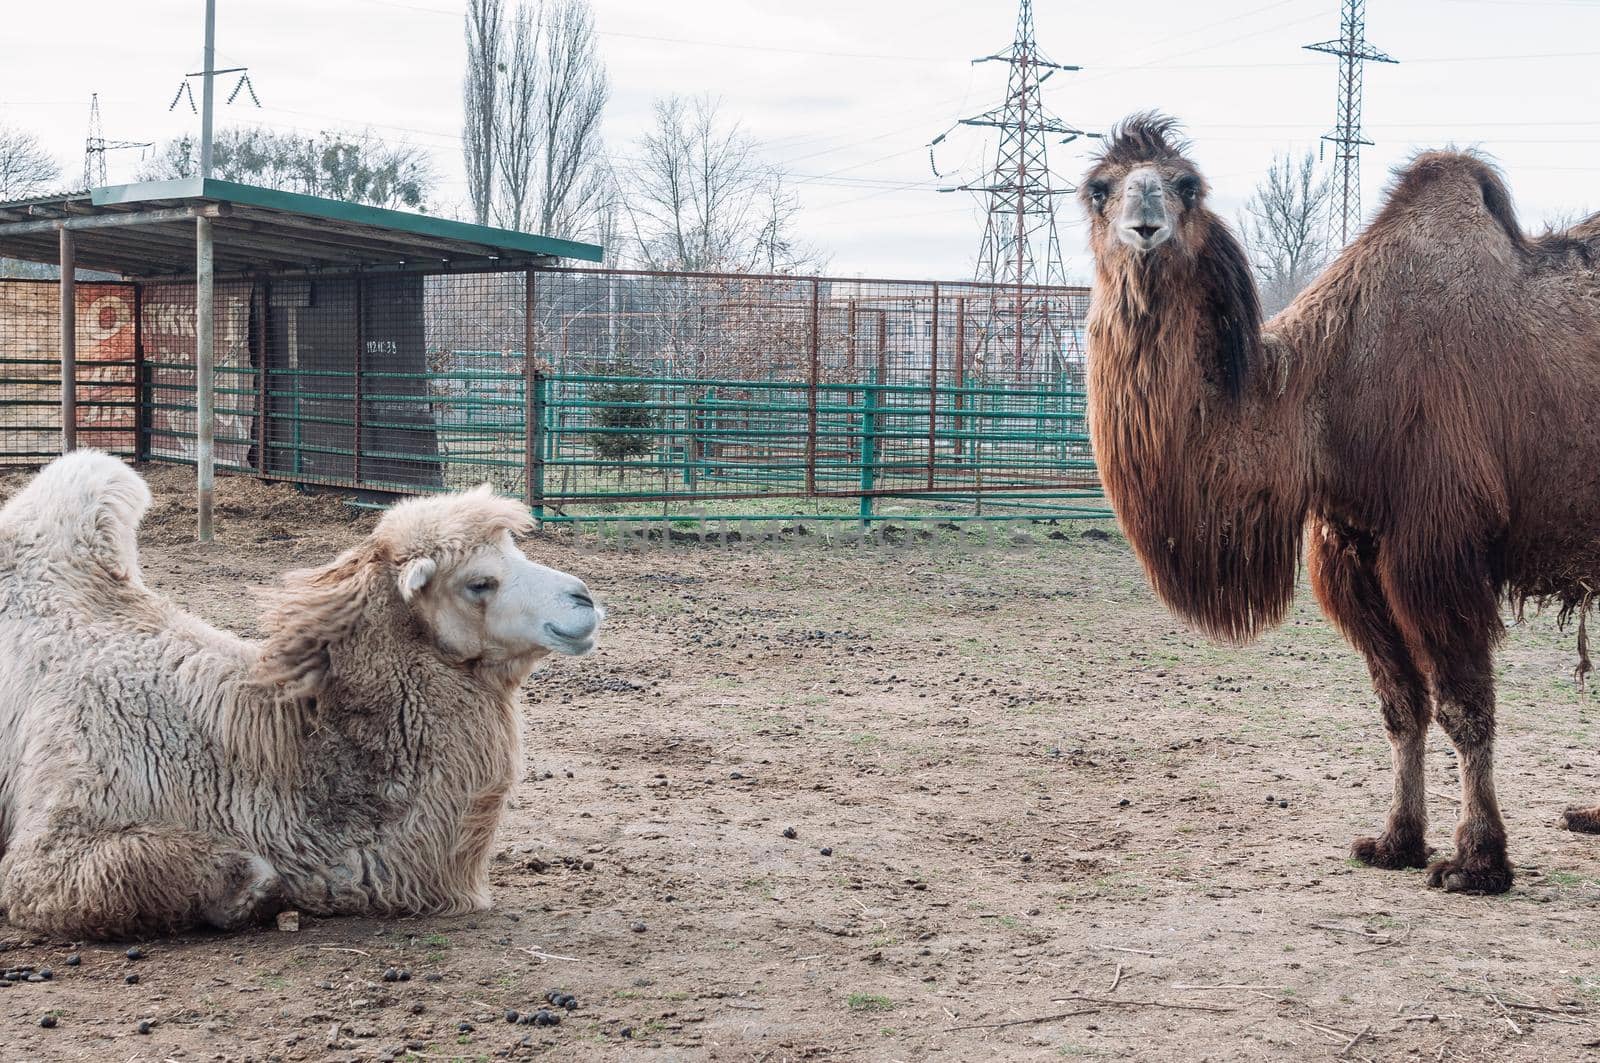 Two camels in a paddock on a farm look into the frame. The animal is on the farm at the zoo. Camelus bactrianus, a large ungulate animal that lives in the steppes of Central Asia.